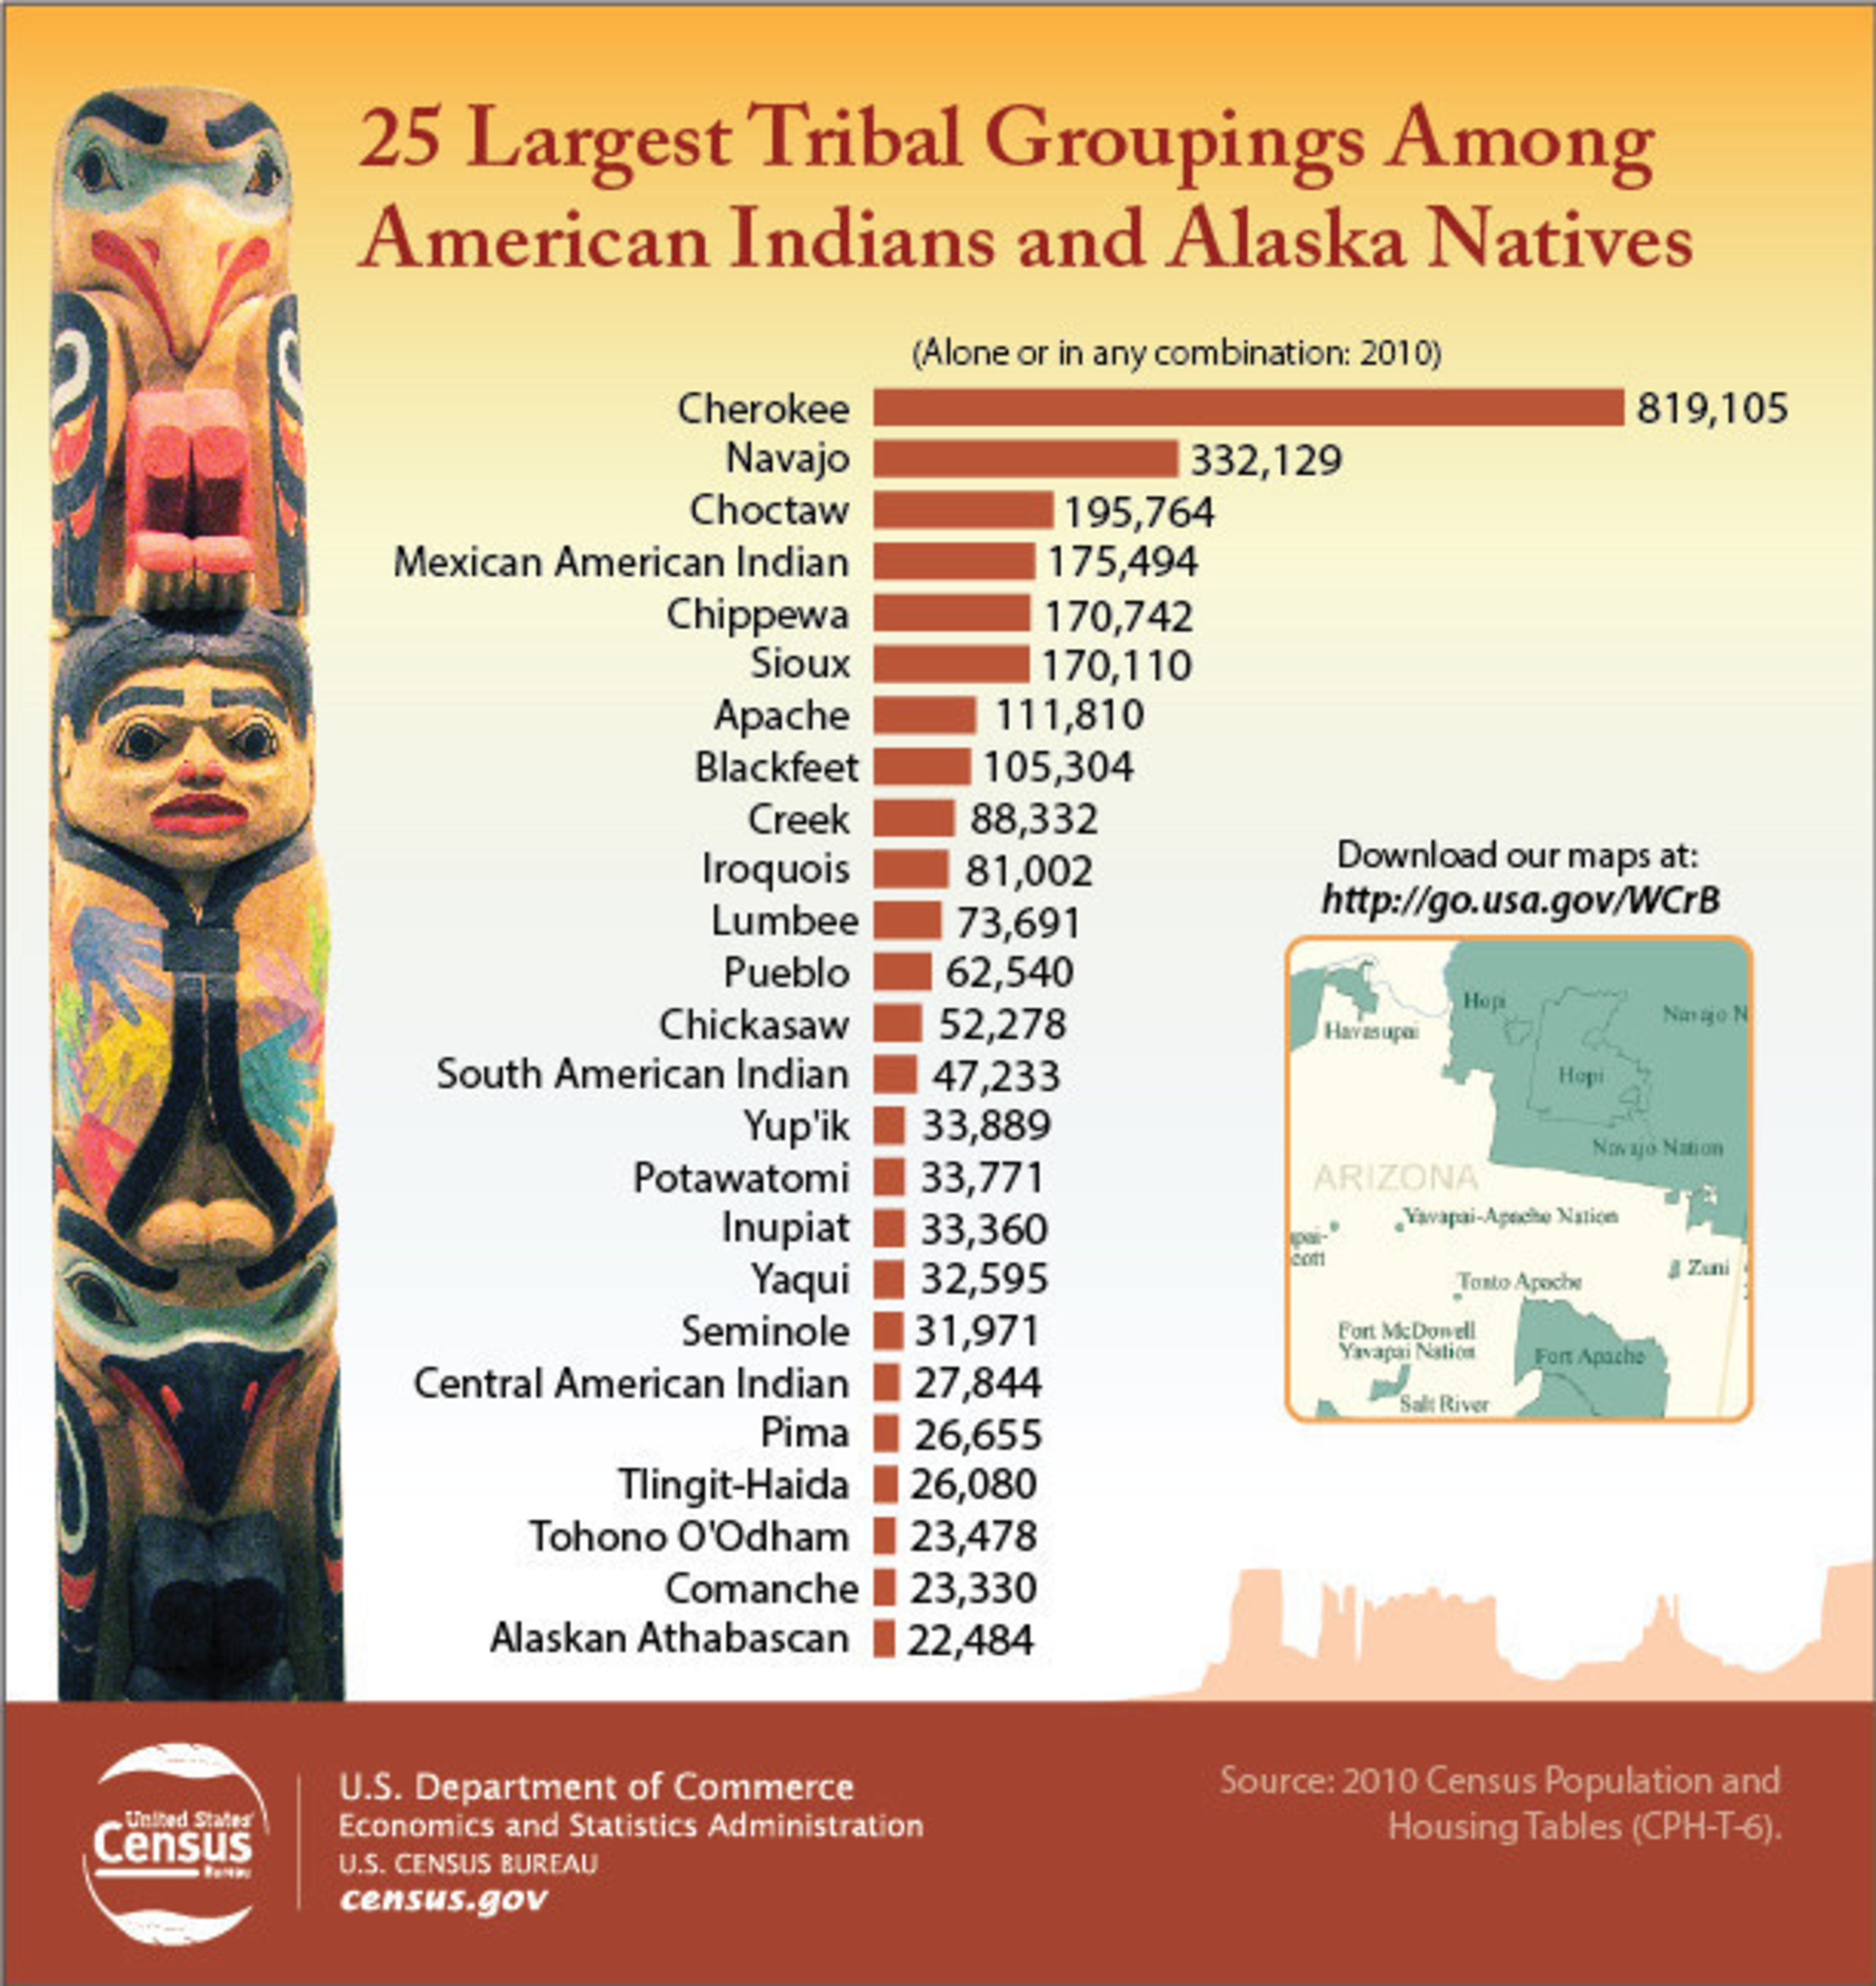 To commemorate the nation's American Indian and Alaska Native heritage, this news graphic lists the 25 largest tribal groupings among American Indians and Alaska Natives.